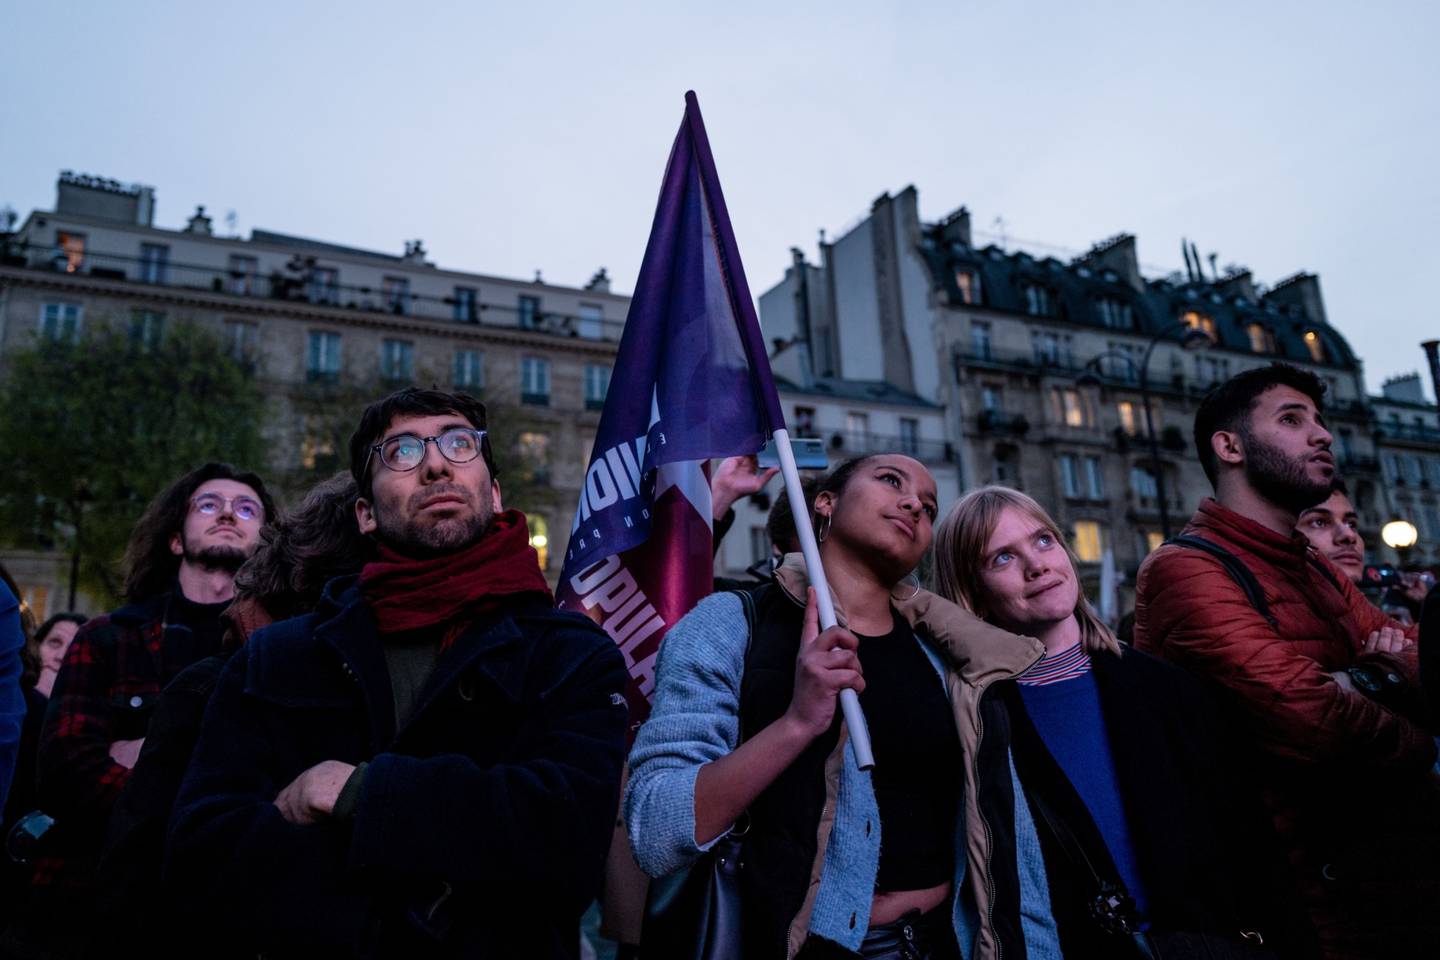 Supporters of eliminated candidate Jean-Luc Melenchon will be key to deciding the second round. Bloomberg